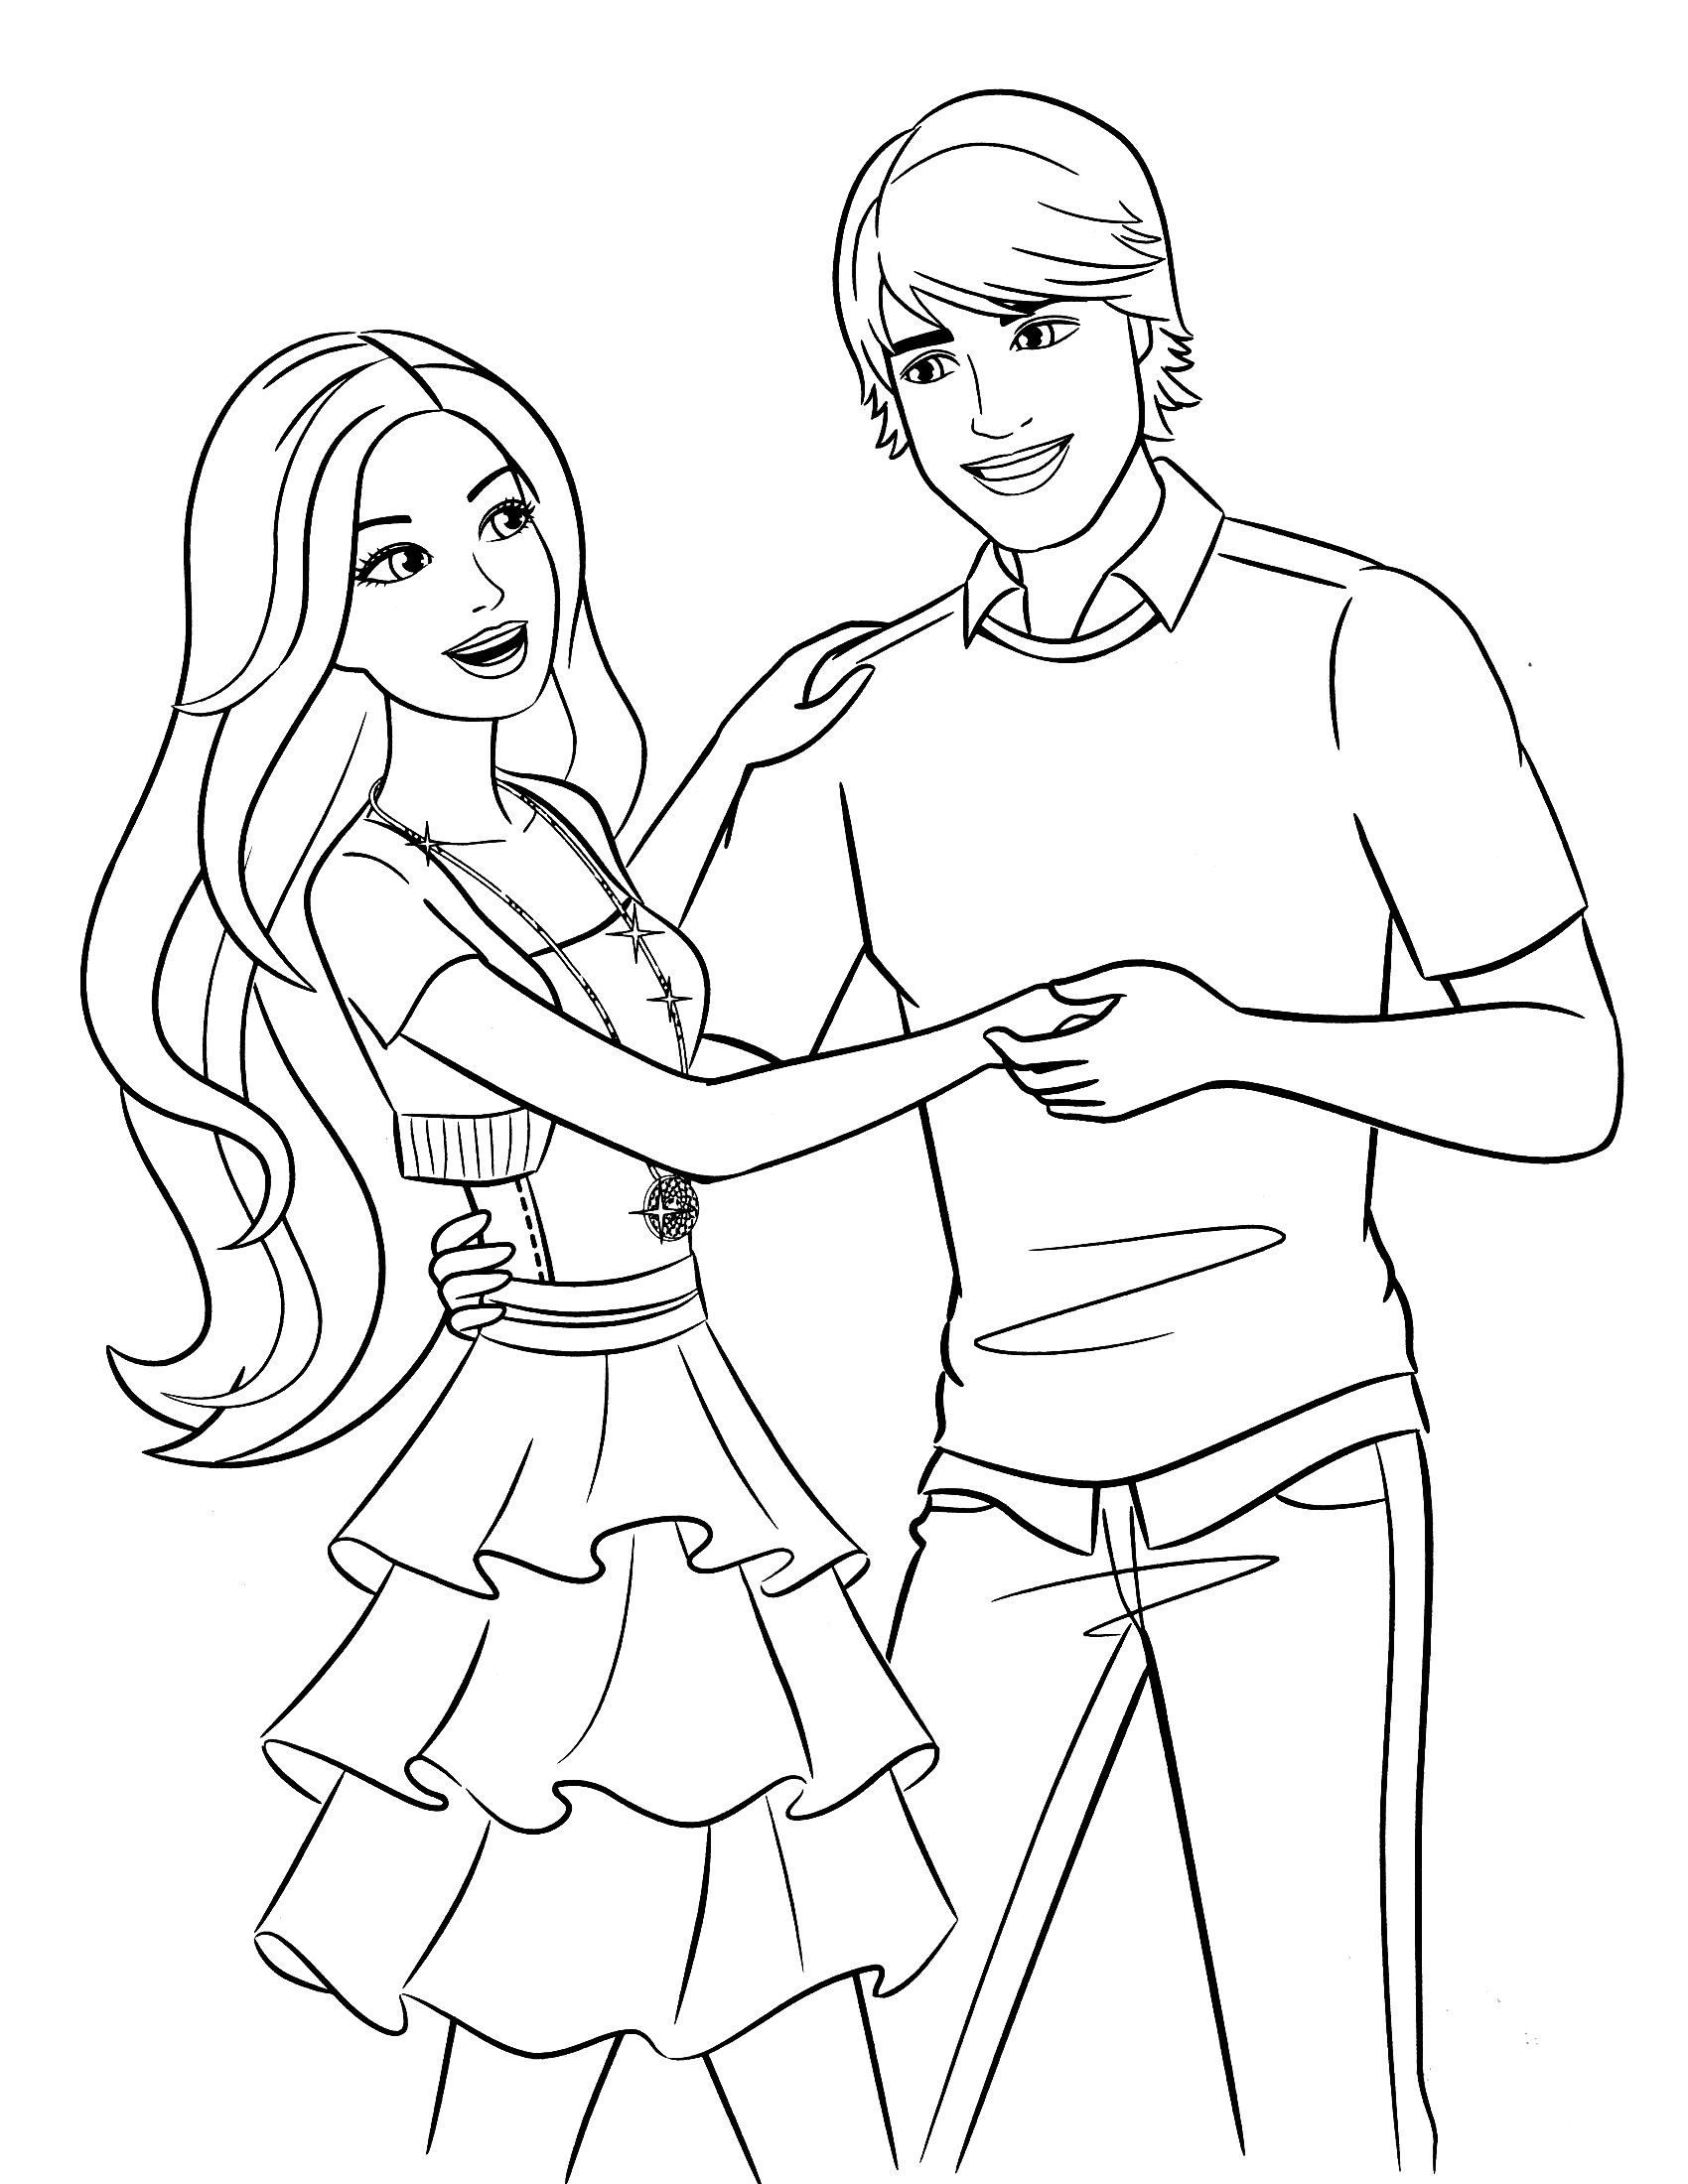 Barbie Coloring Pages For Kids
 Barbie And Ken Coloring Pages Free Download